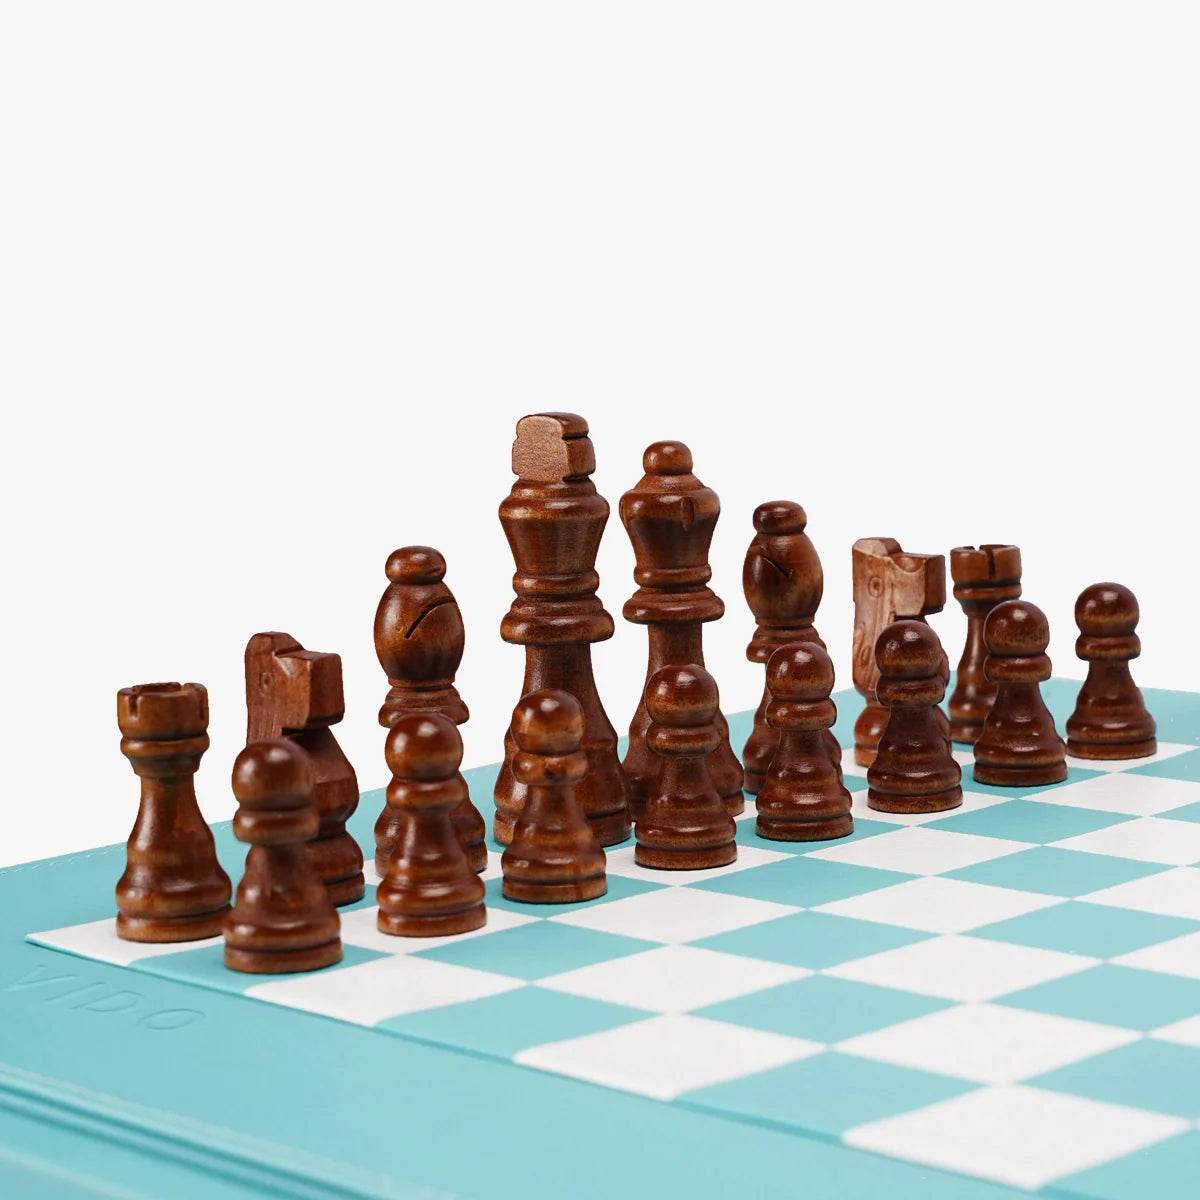 Luxury Chess Box Crafted With Turquoise Vegan Leather - Designed By VIDO